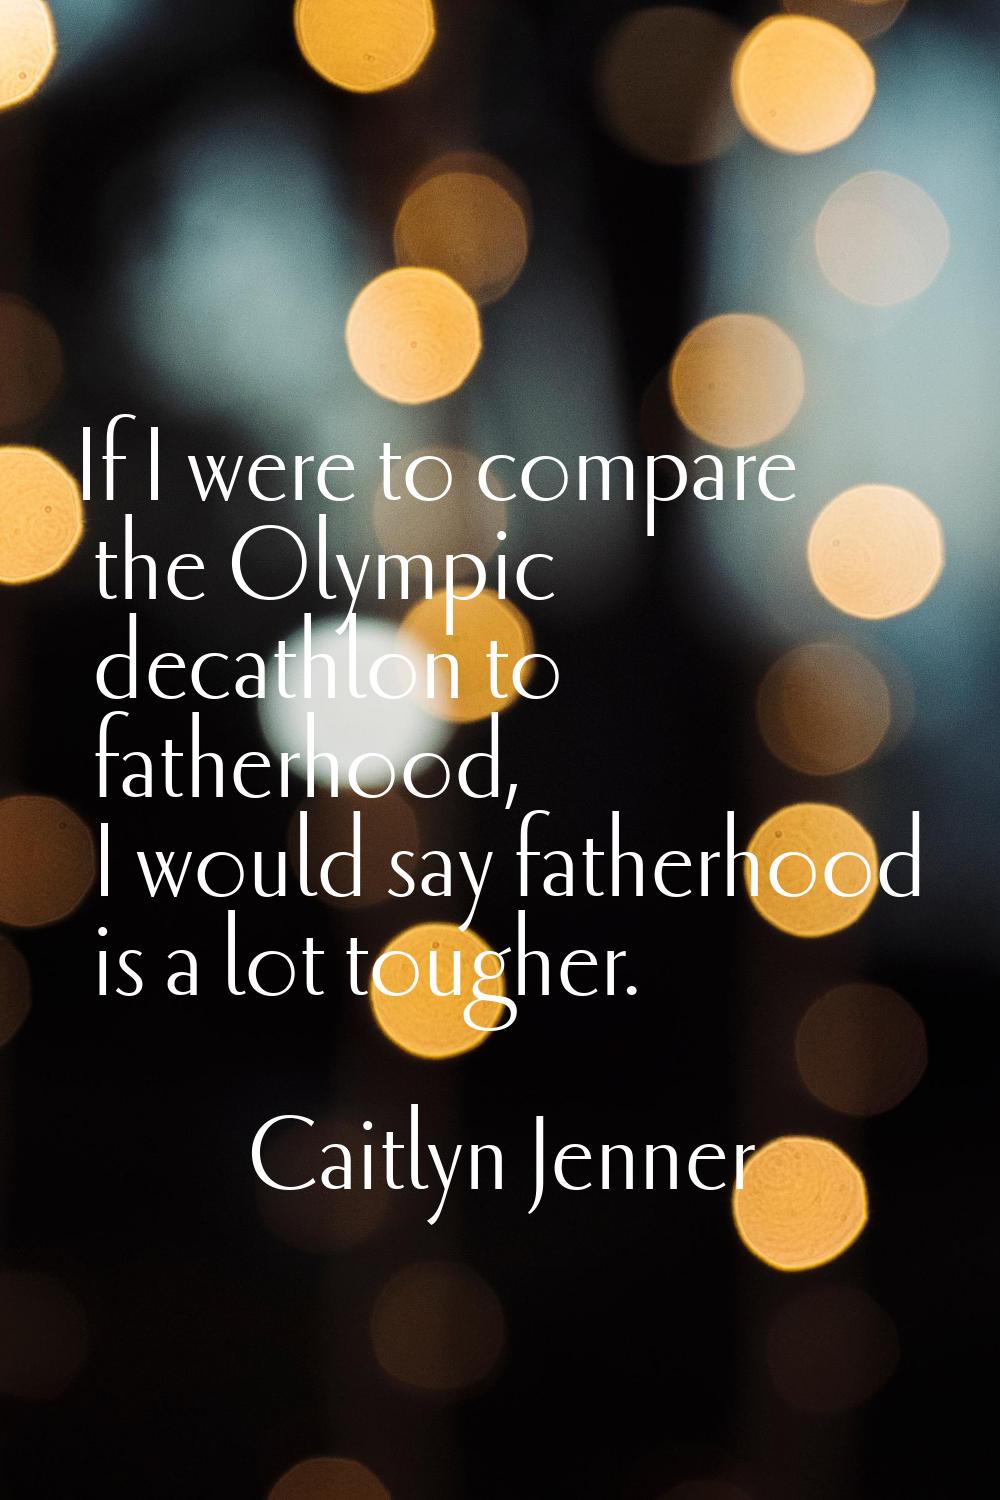 If I were to compare the Olympic decathlon to fatherhood, I would say fatherhood is a lot tougher.